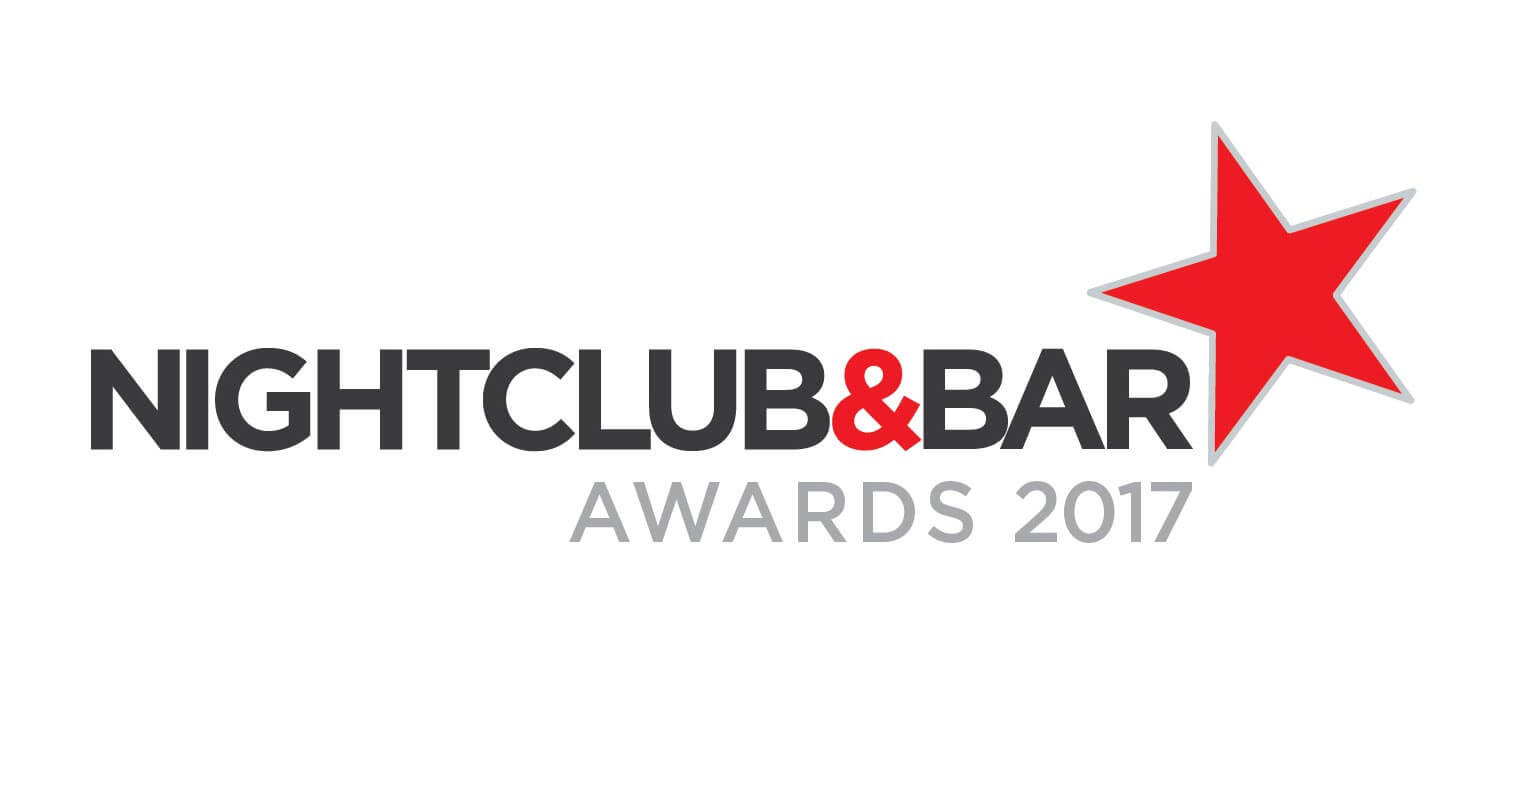 2017 Nightclub & Bar Awards Now Accepting Entries, featured image